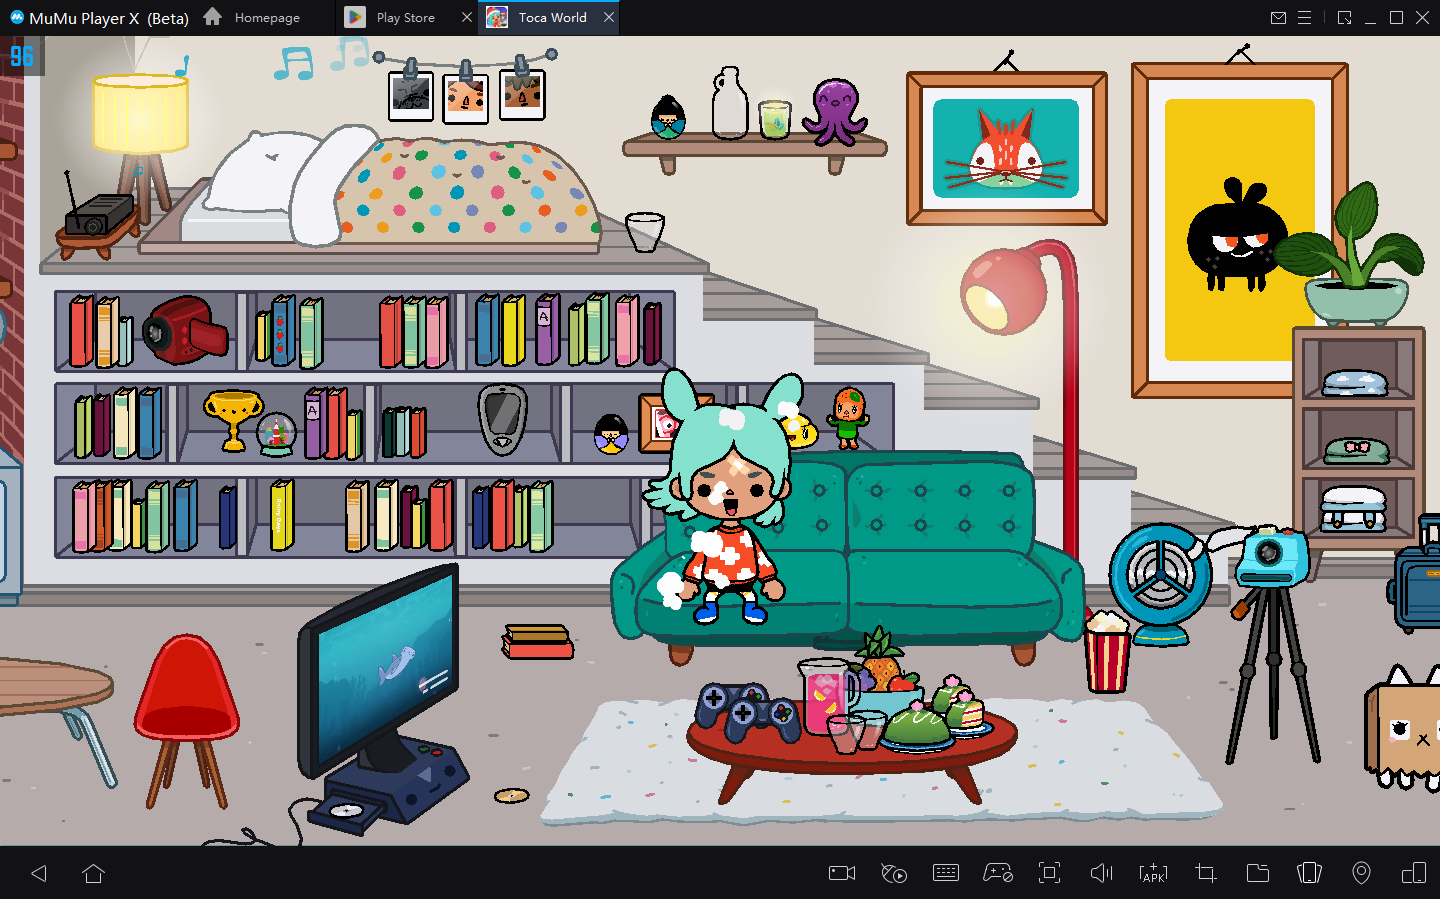 How to Play Toca Life World on PC with MuMu Player X